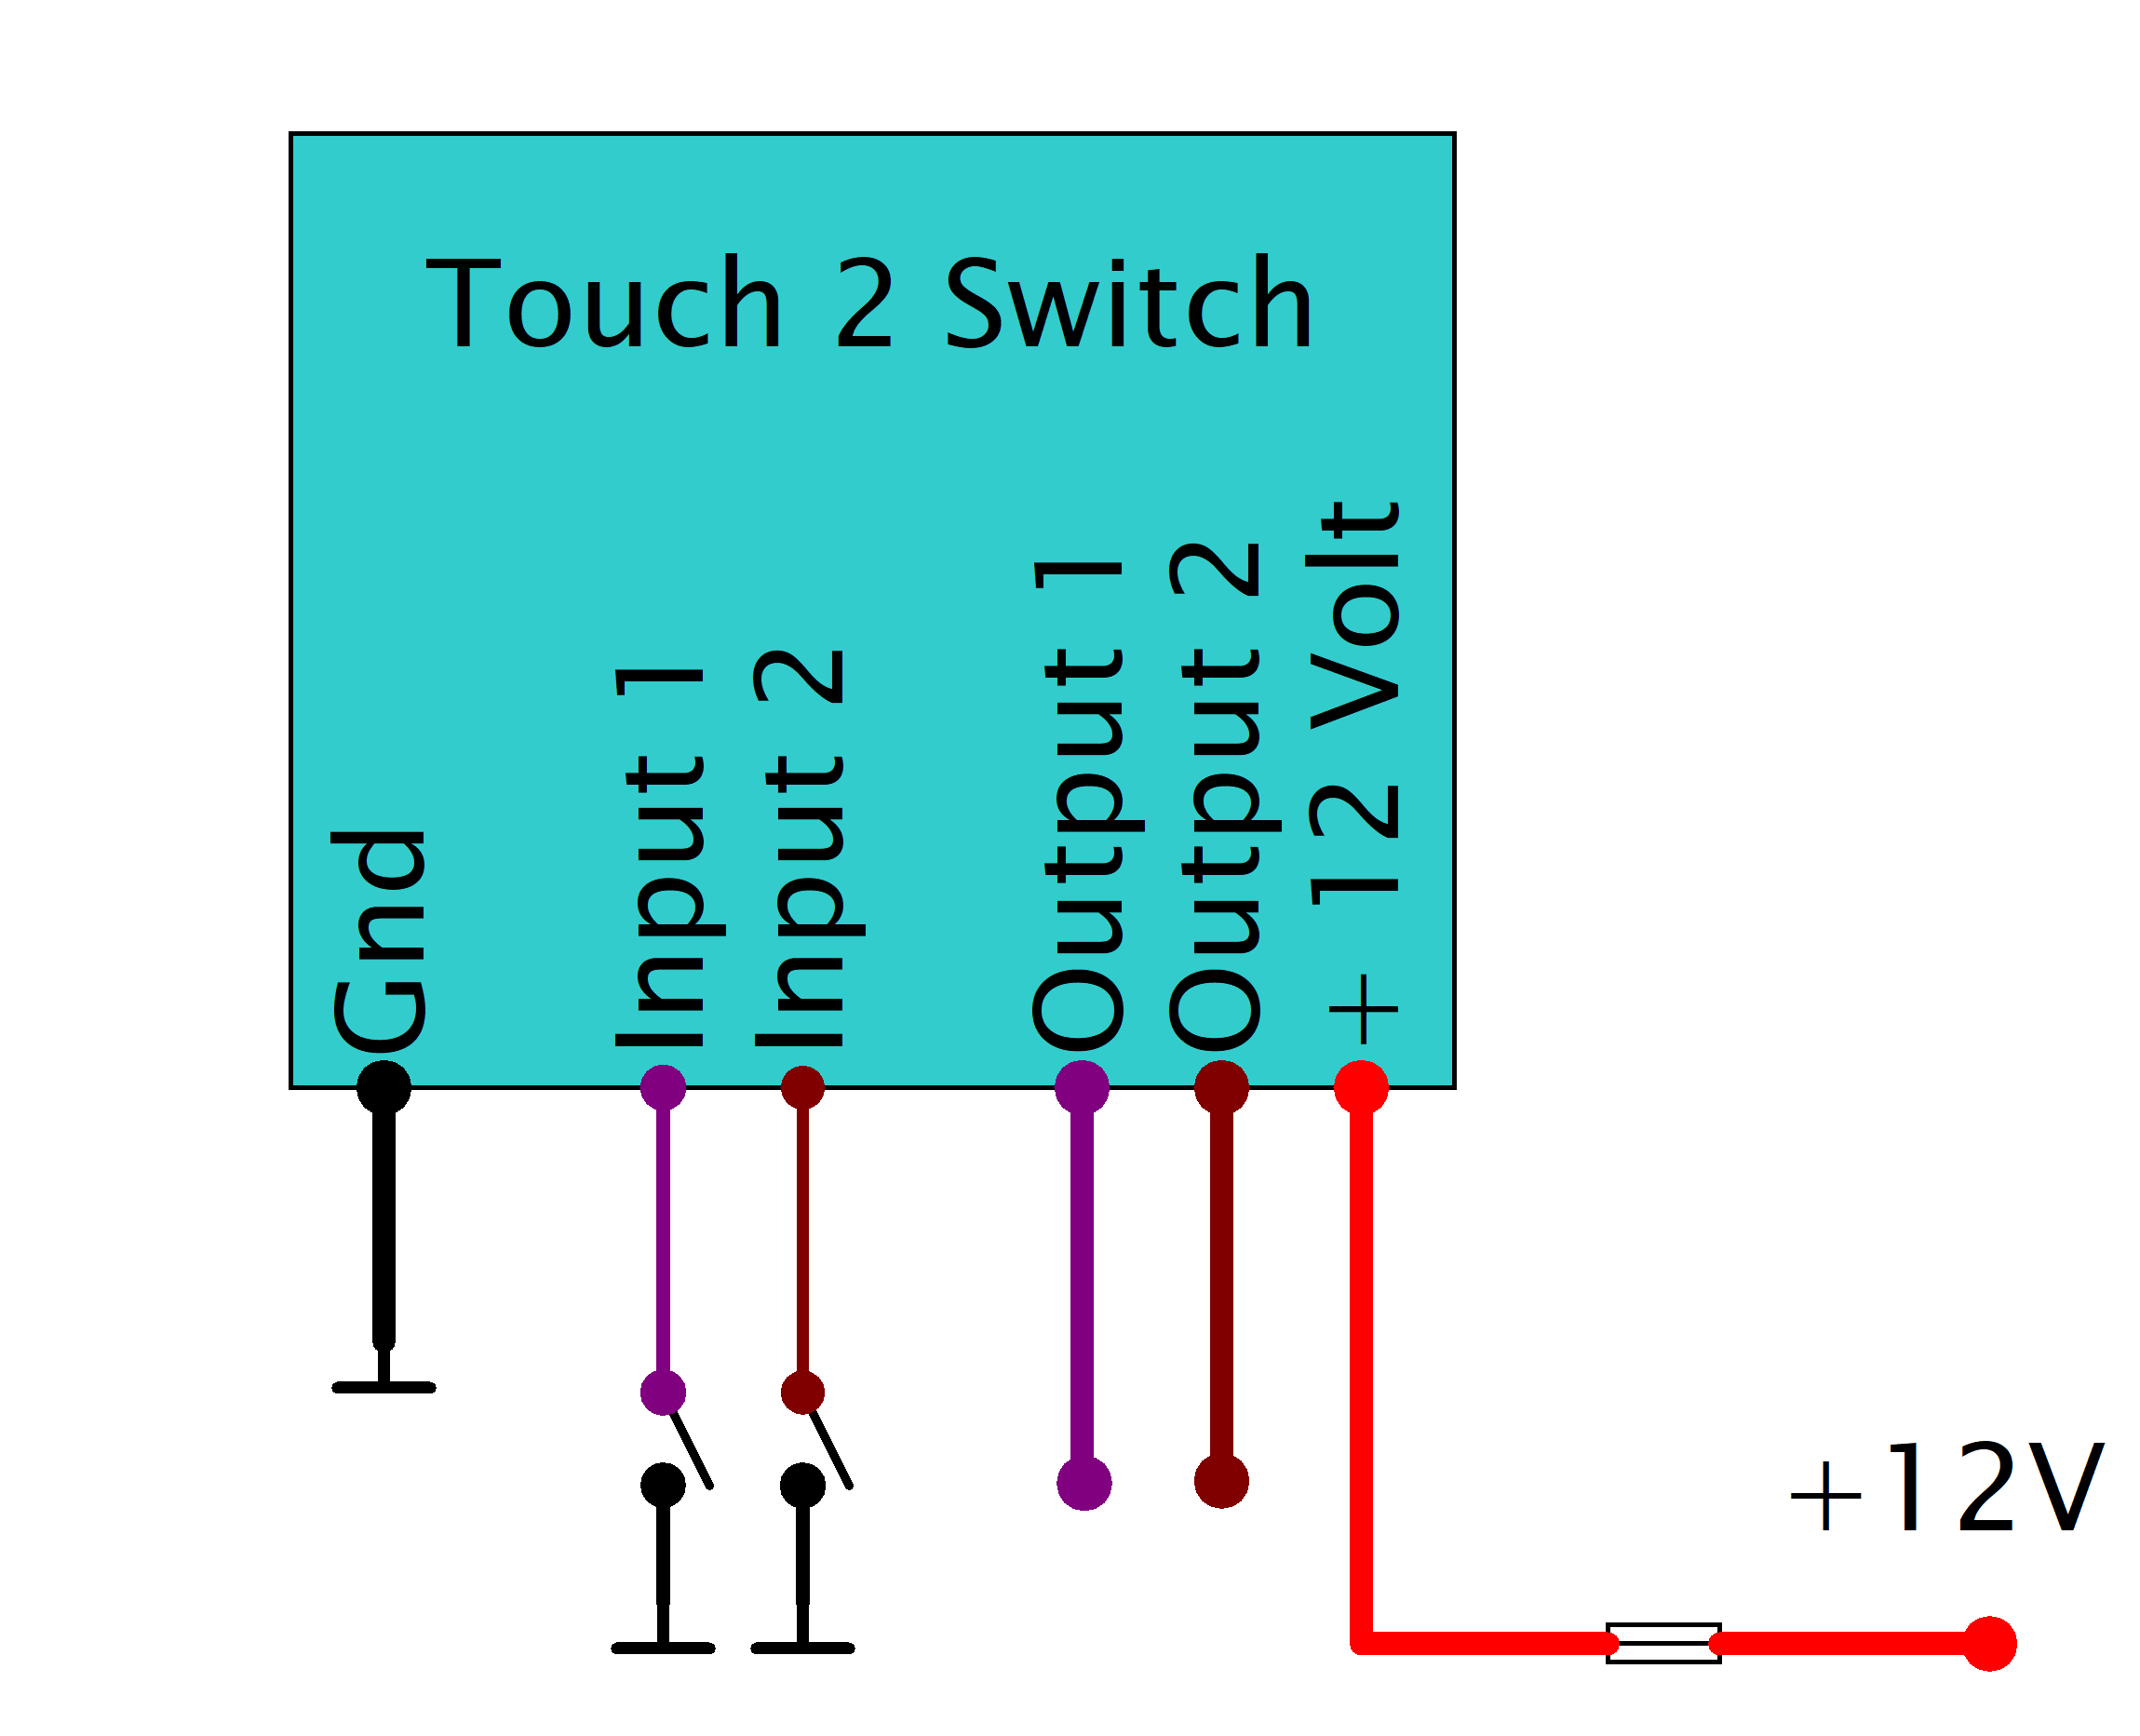 Touch 2 Switch